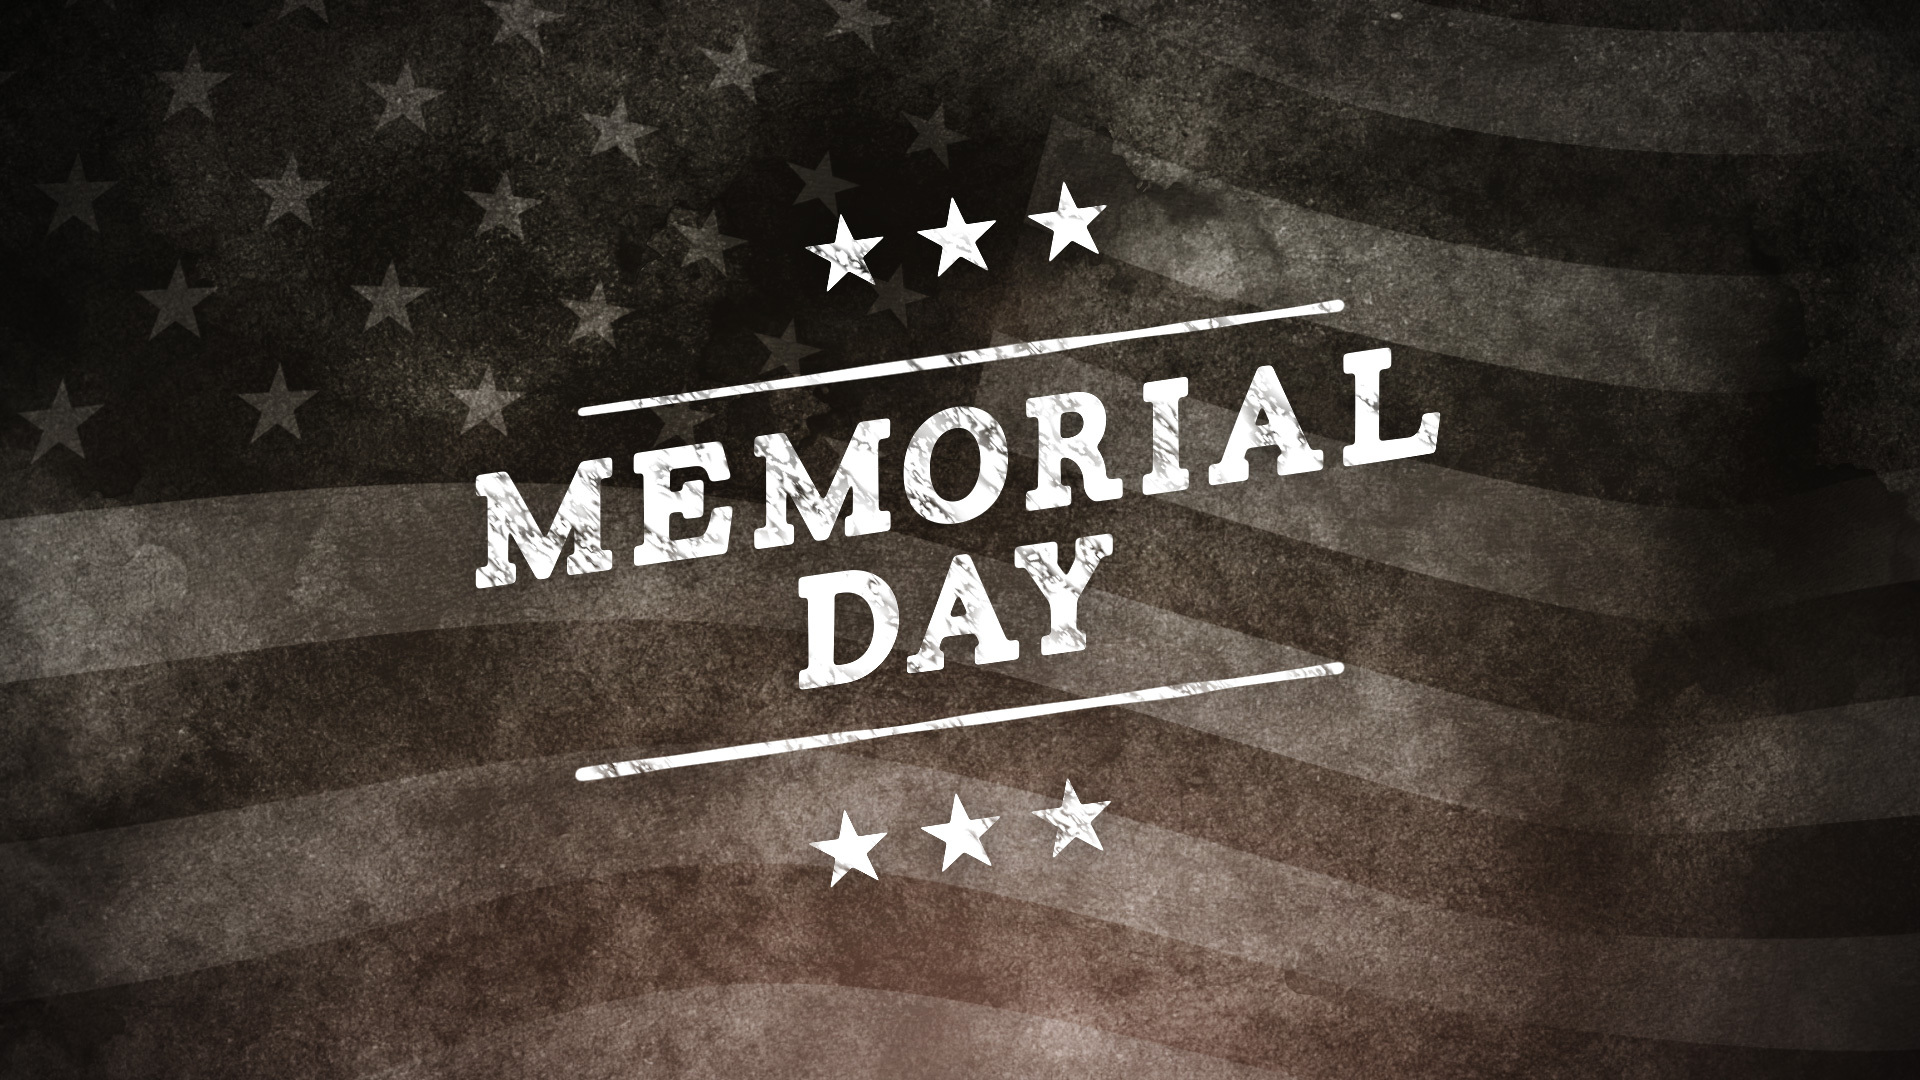 Memorial Day Wallpapers Images Photos Pictures Backgrounds HD Wallpapers Download Free Images Wallpaper [wallpaper981.blogspot.com]